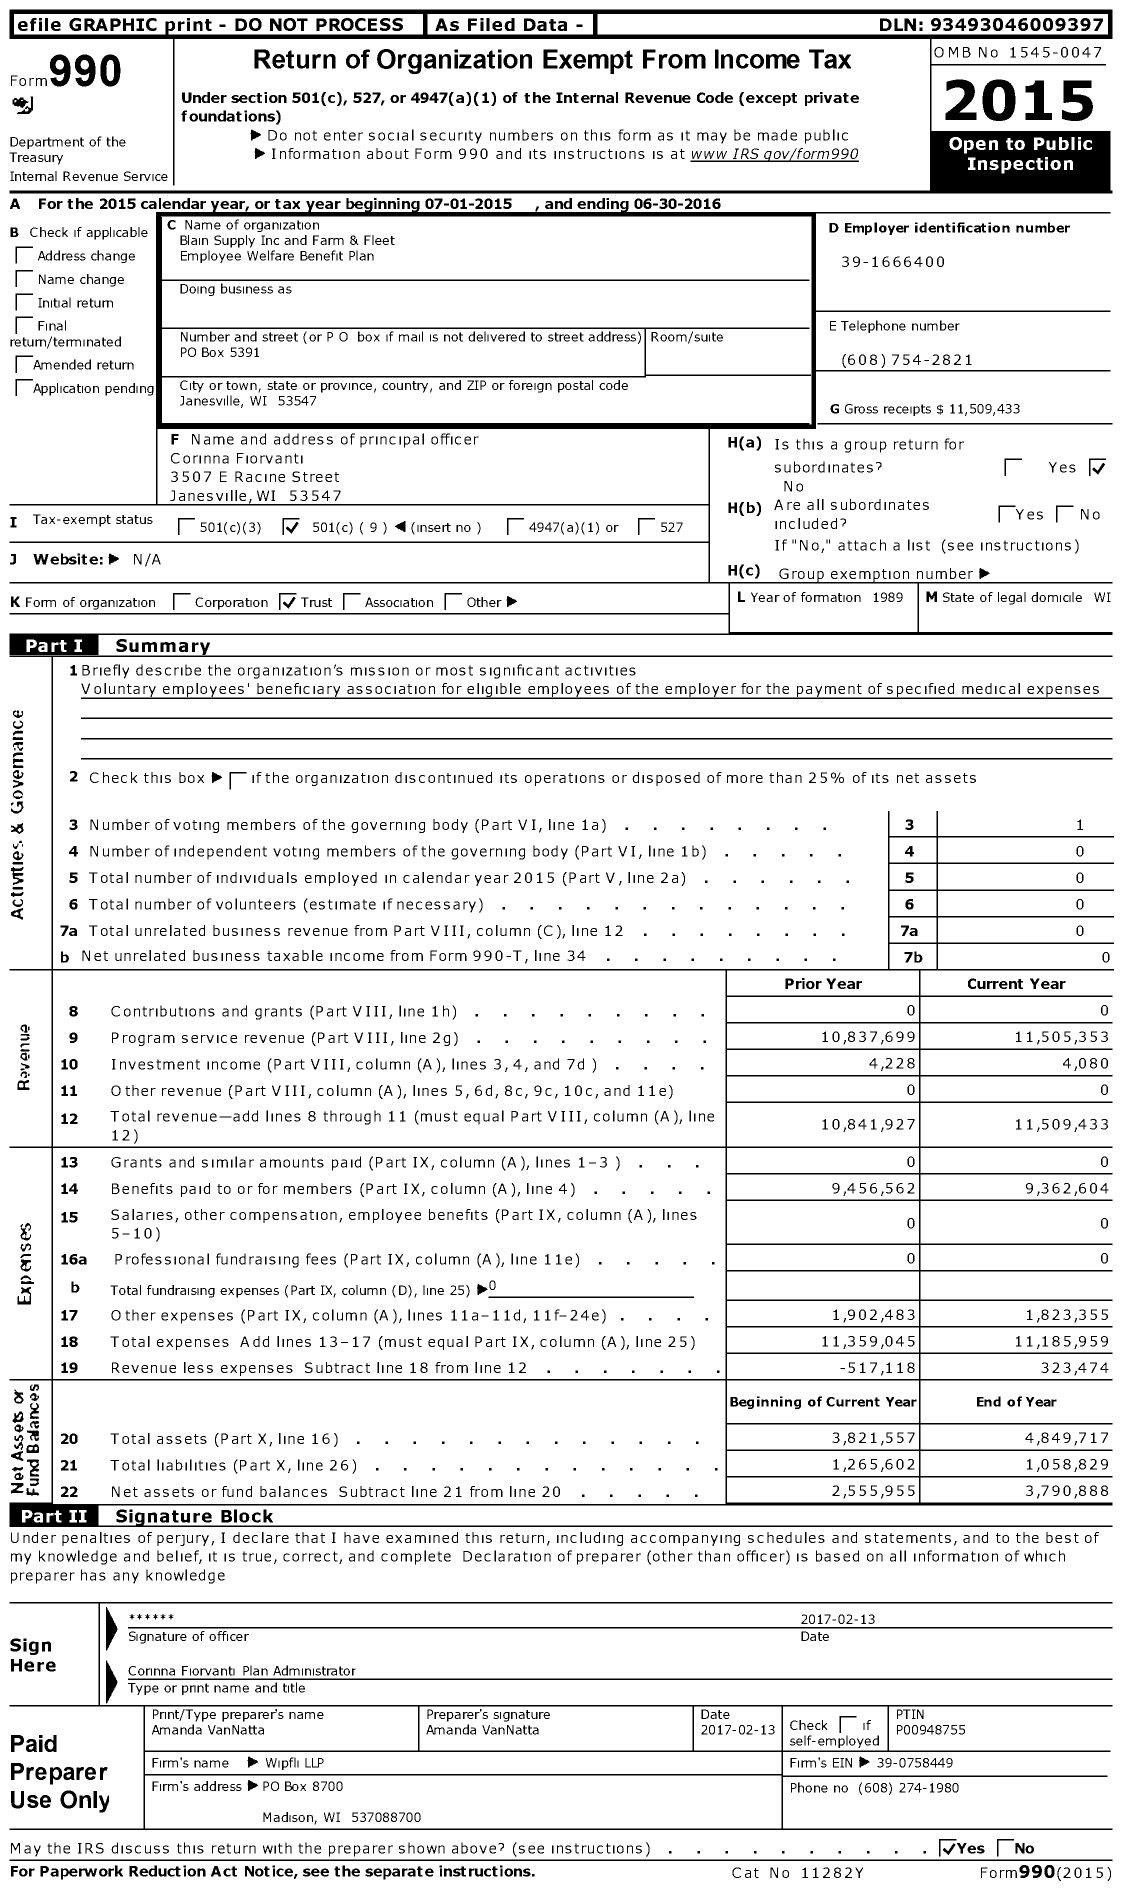 Image of first page of 2015 Form 990O for Blain Supply and Farm & Fleet Employee Welfare Benefit Plan